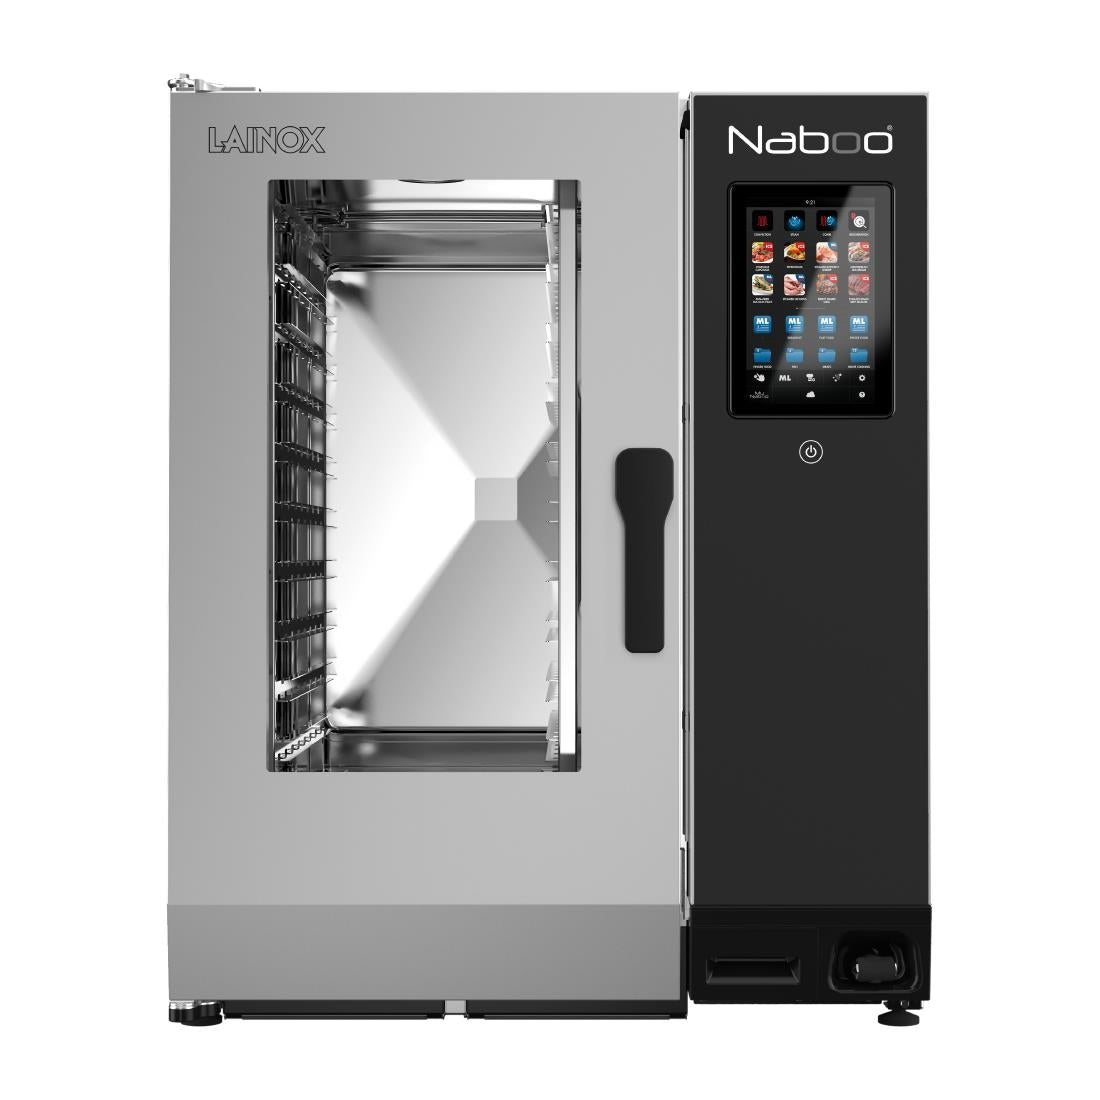 HP541 Lainox Naboo 10x1/1GN Electric Touch Screen Combi Oven with Boiler 3PH NAE101BS JD Catering Equipment Solutions Ltd